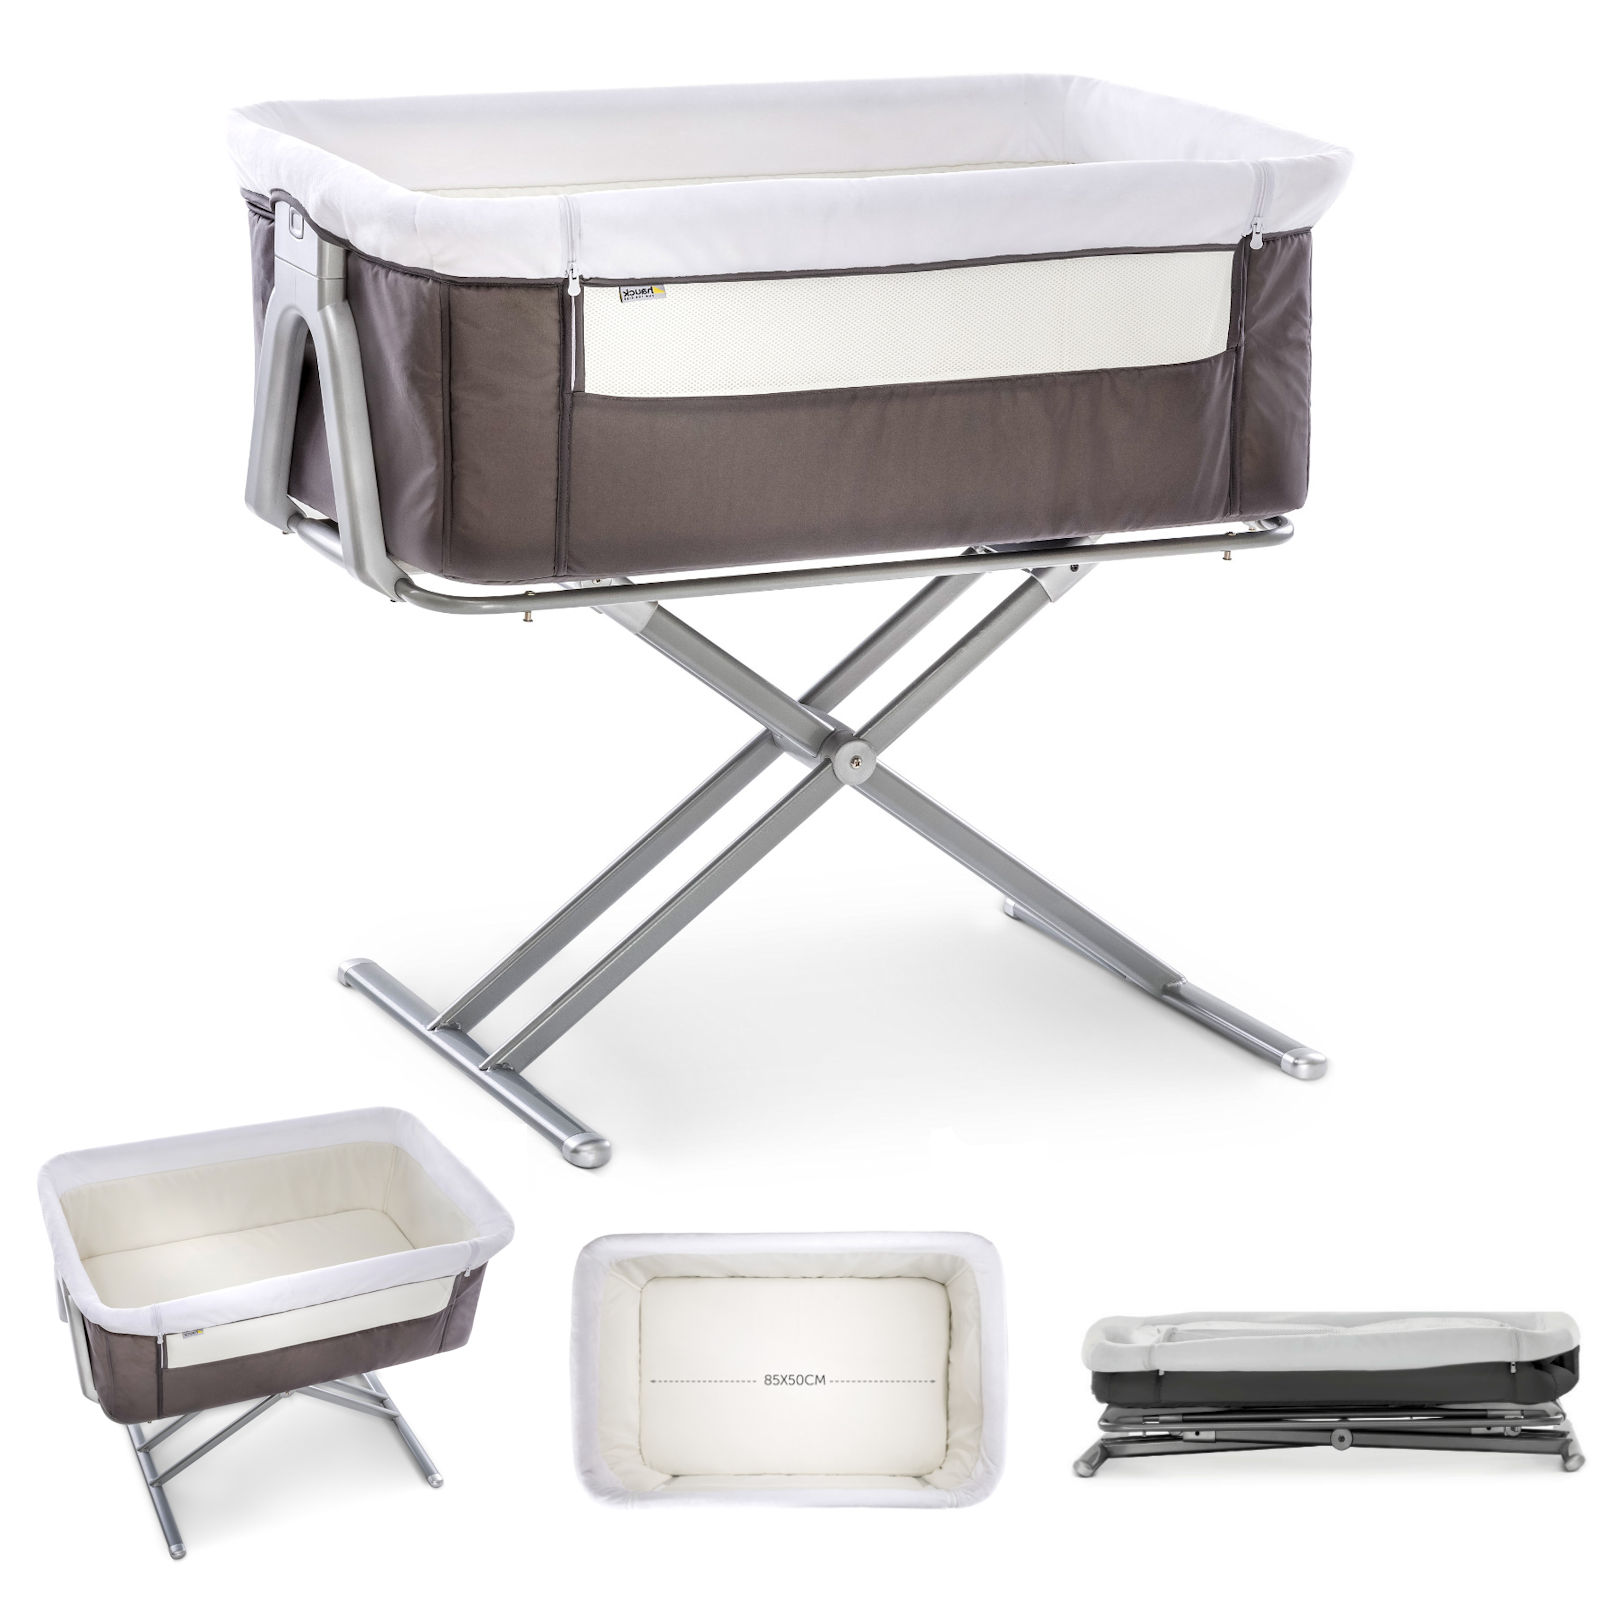 Hauck Face To Me Bedside Crib - Grey 